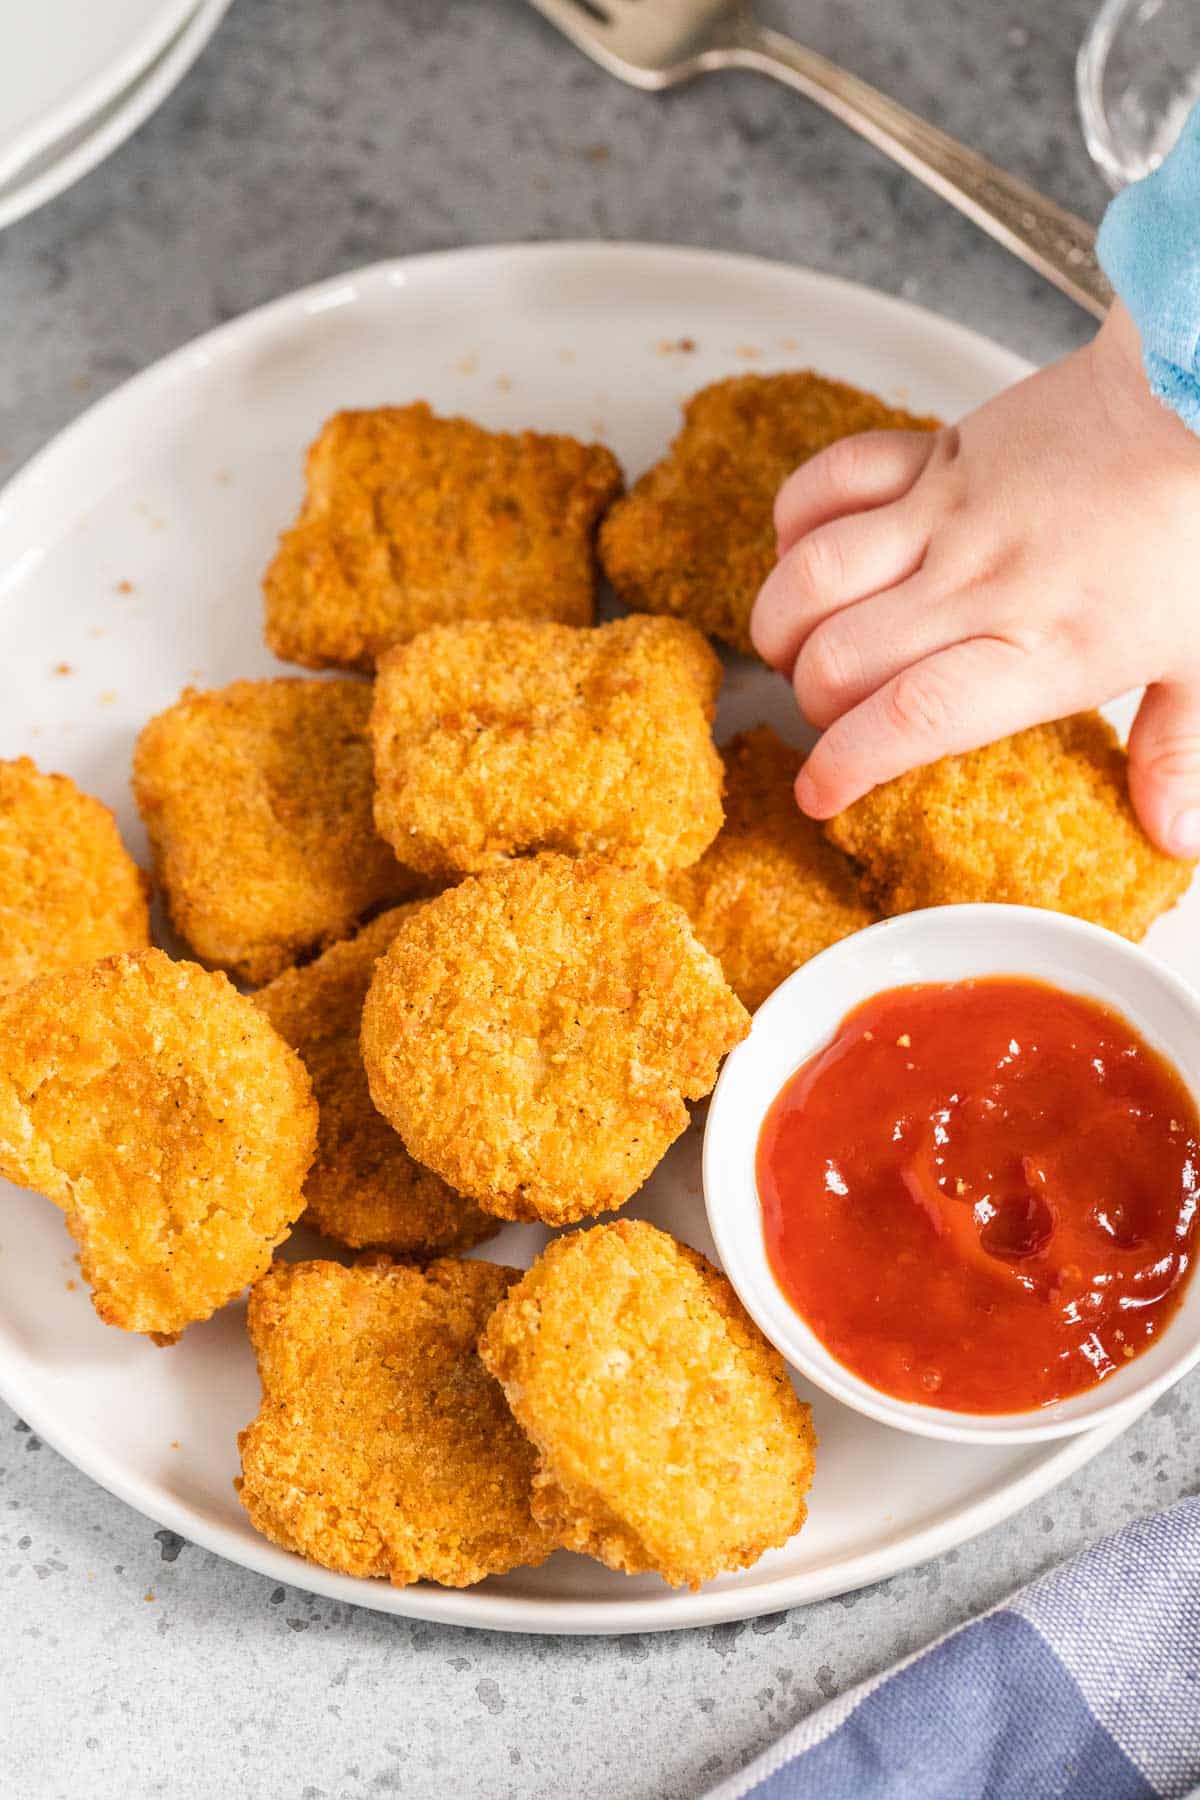 A toddler hand picking up a chicken nugget.